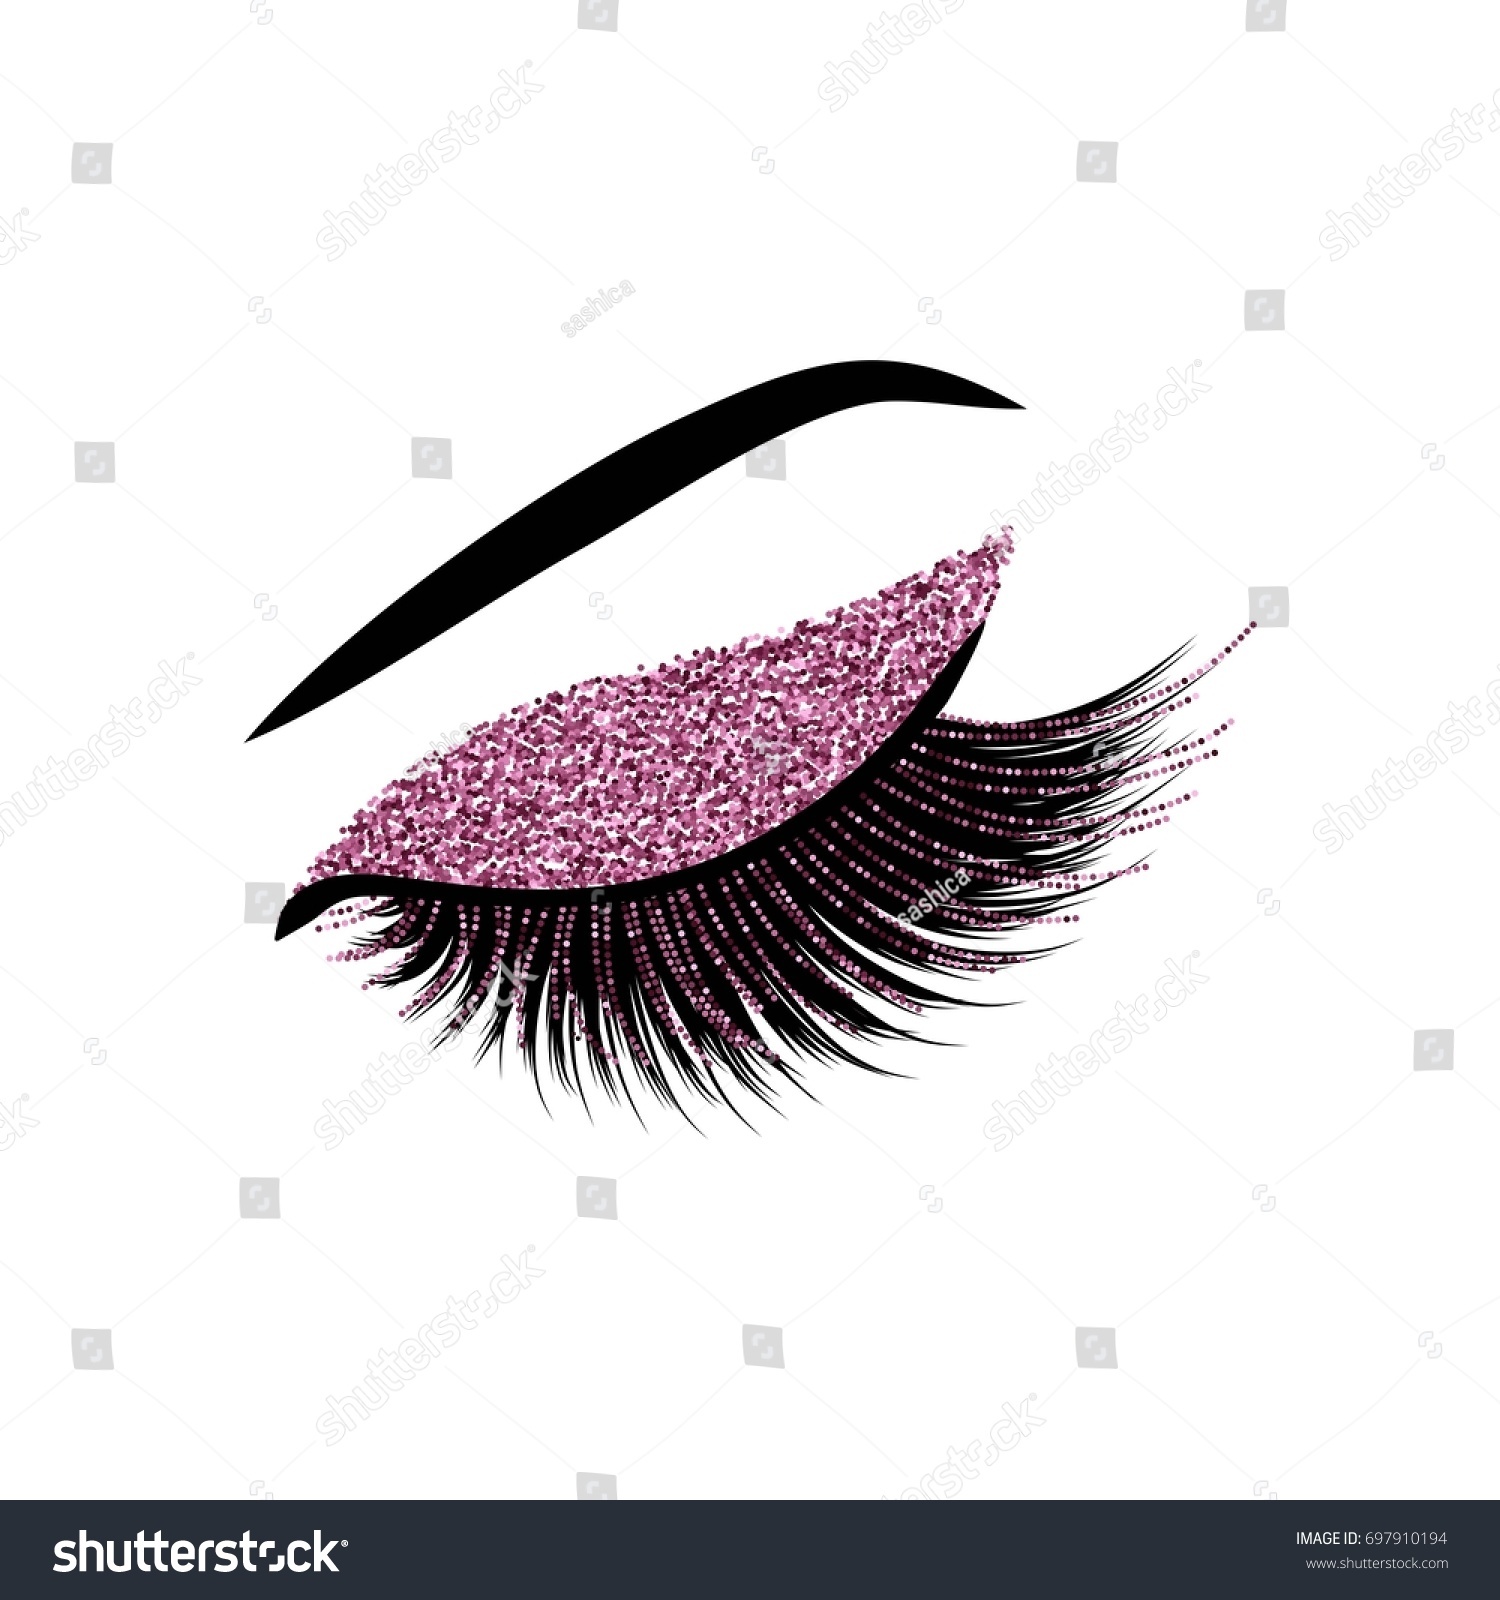 Lashes Vector Illustration Stock Vector (Royalty Free) 697910194